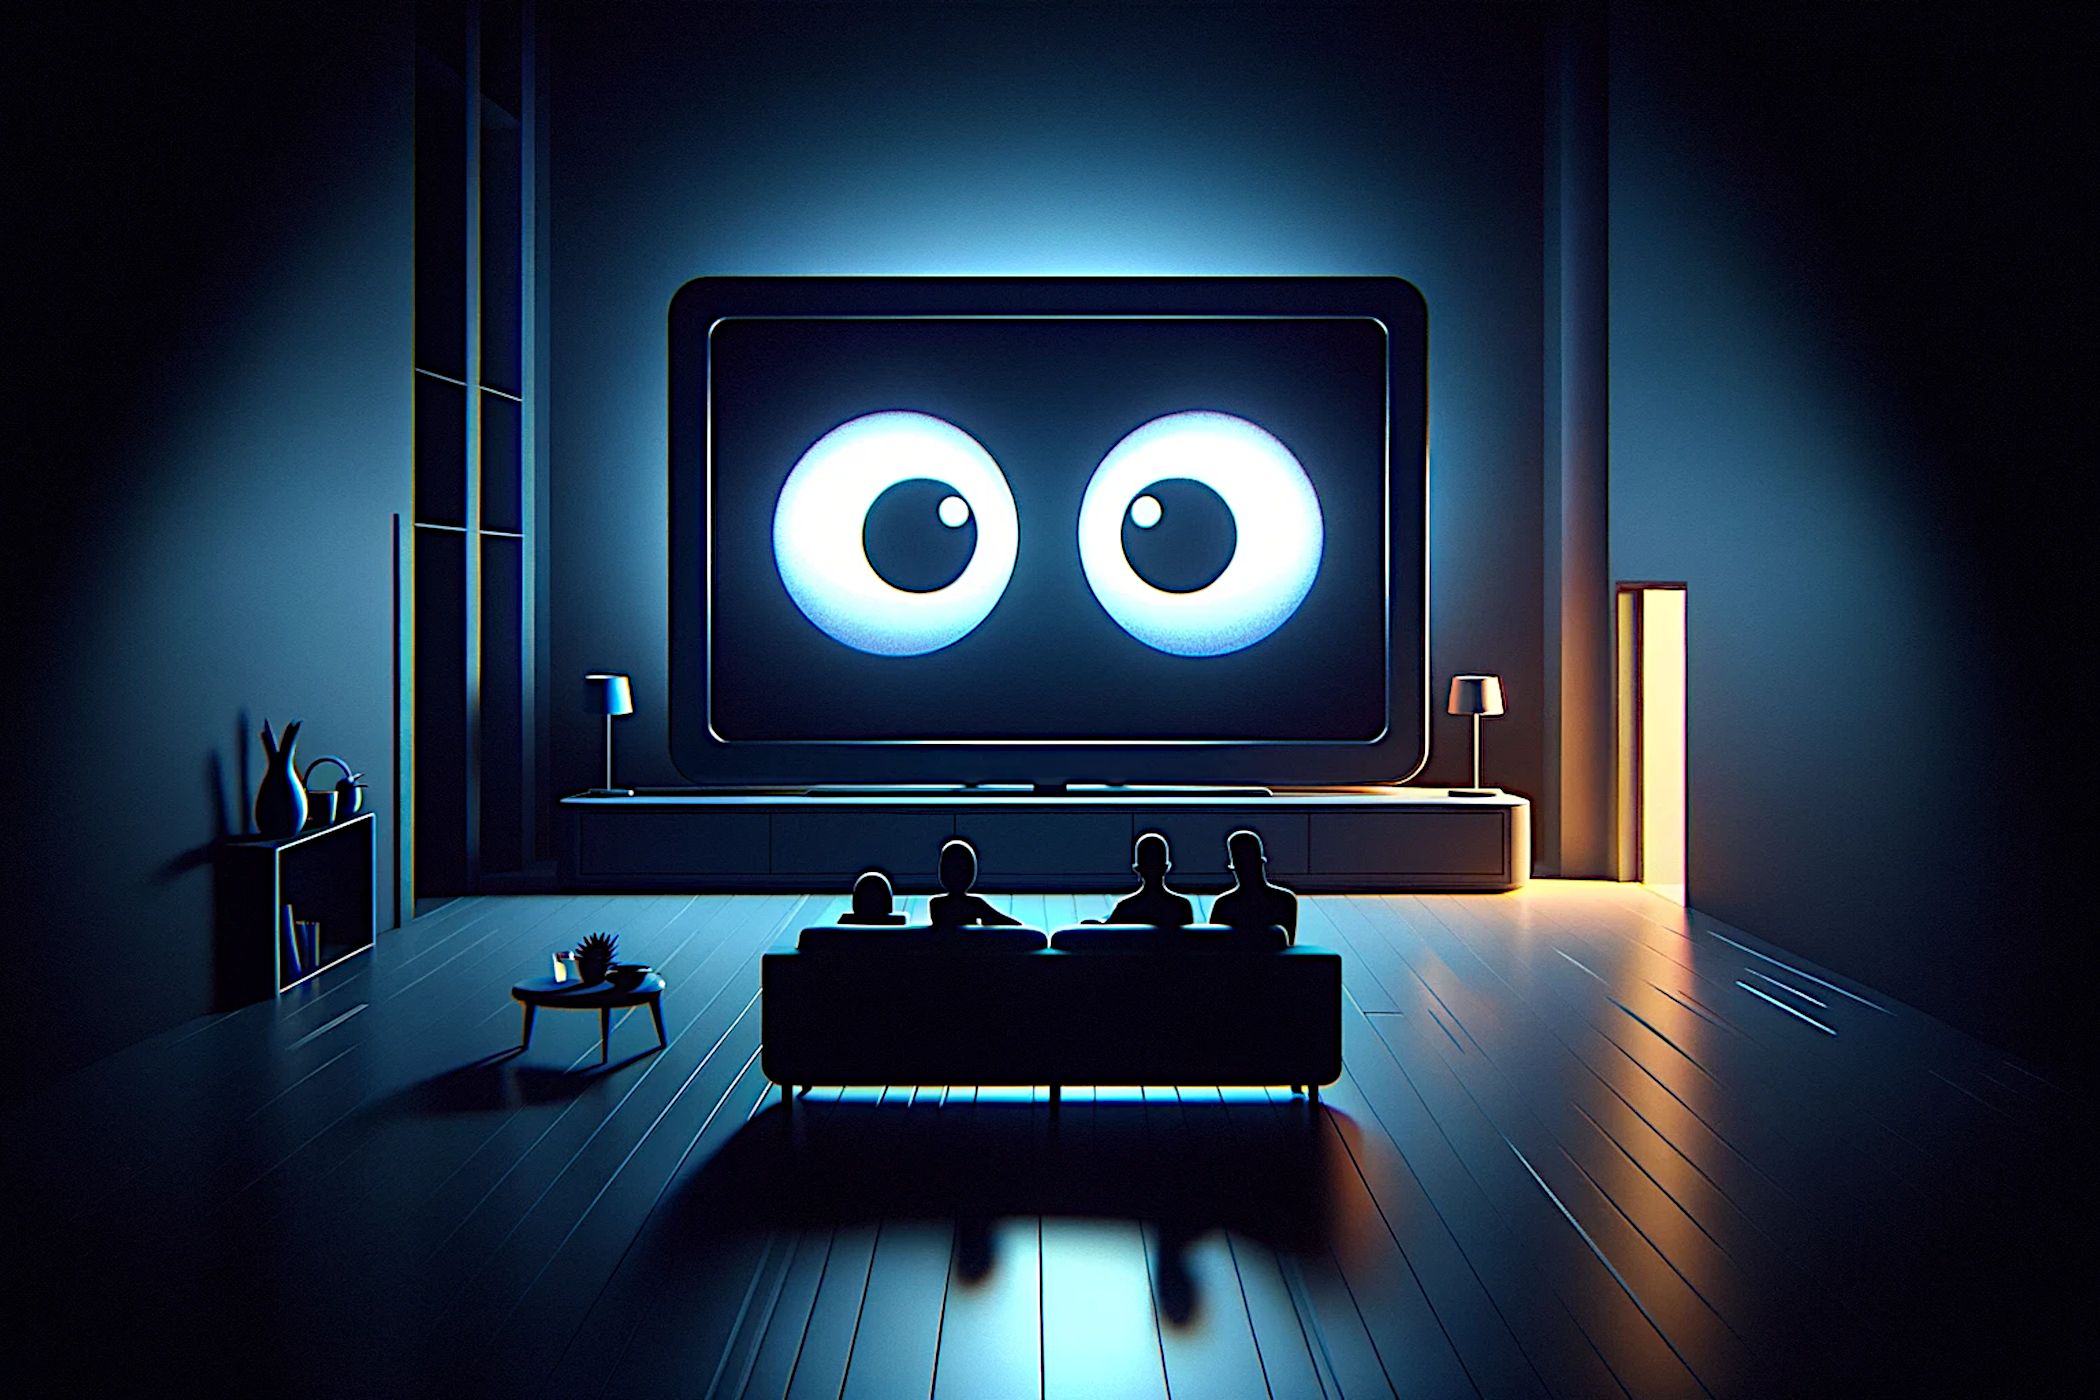 Smart TV spying with eyes looking at people on the couch.